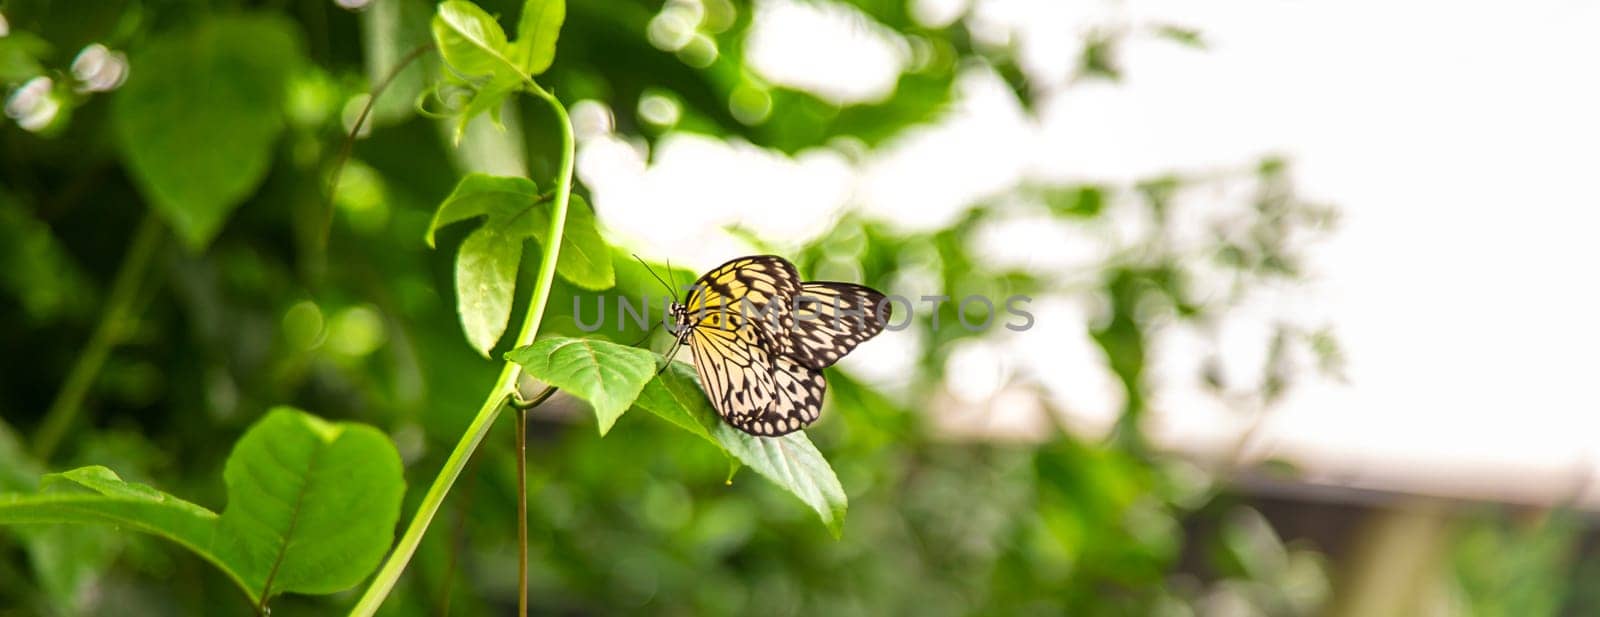 Beautiful butterfly in the garden. Selective focus. Nature.